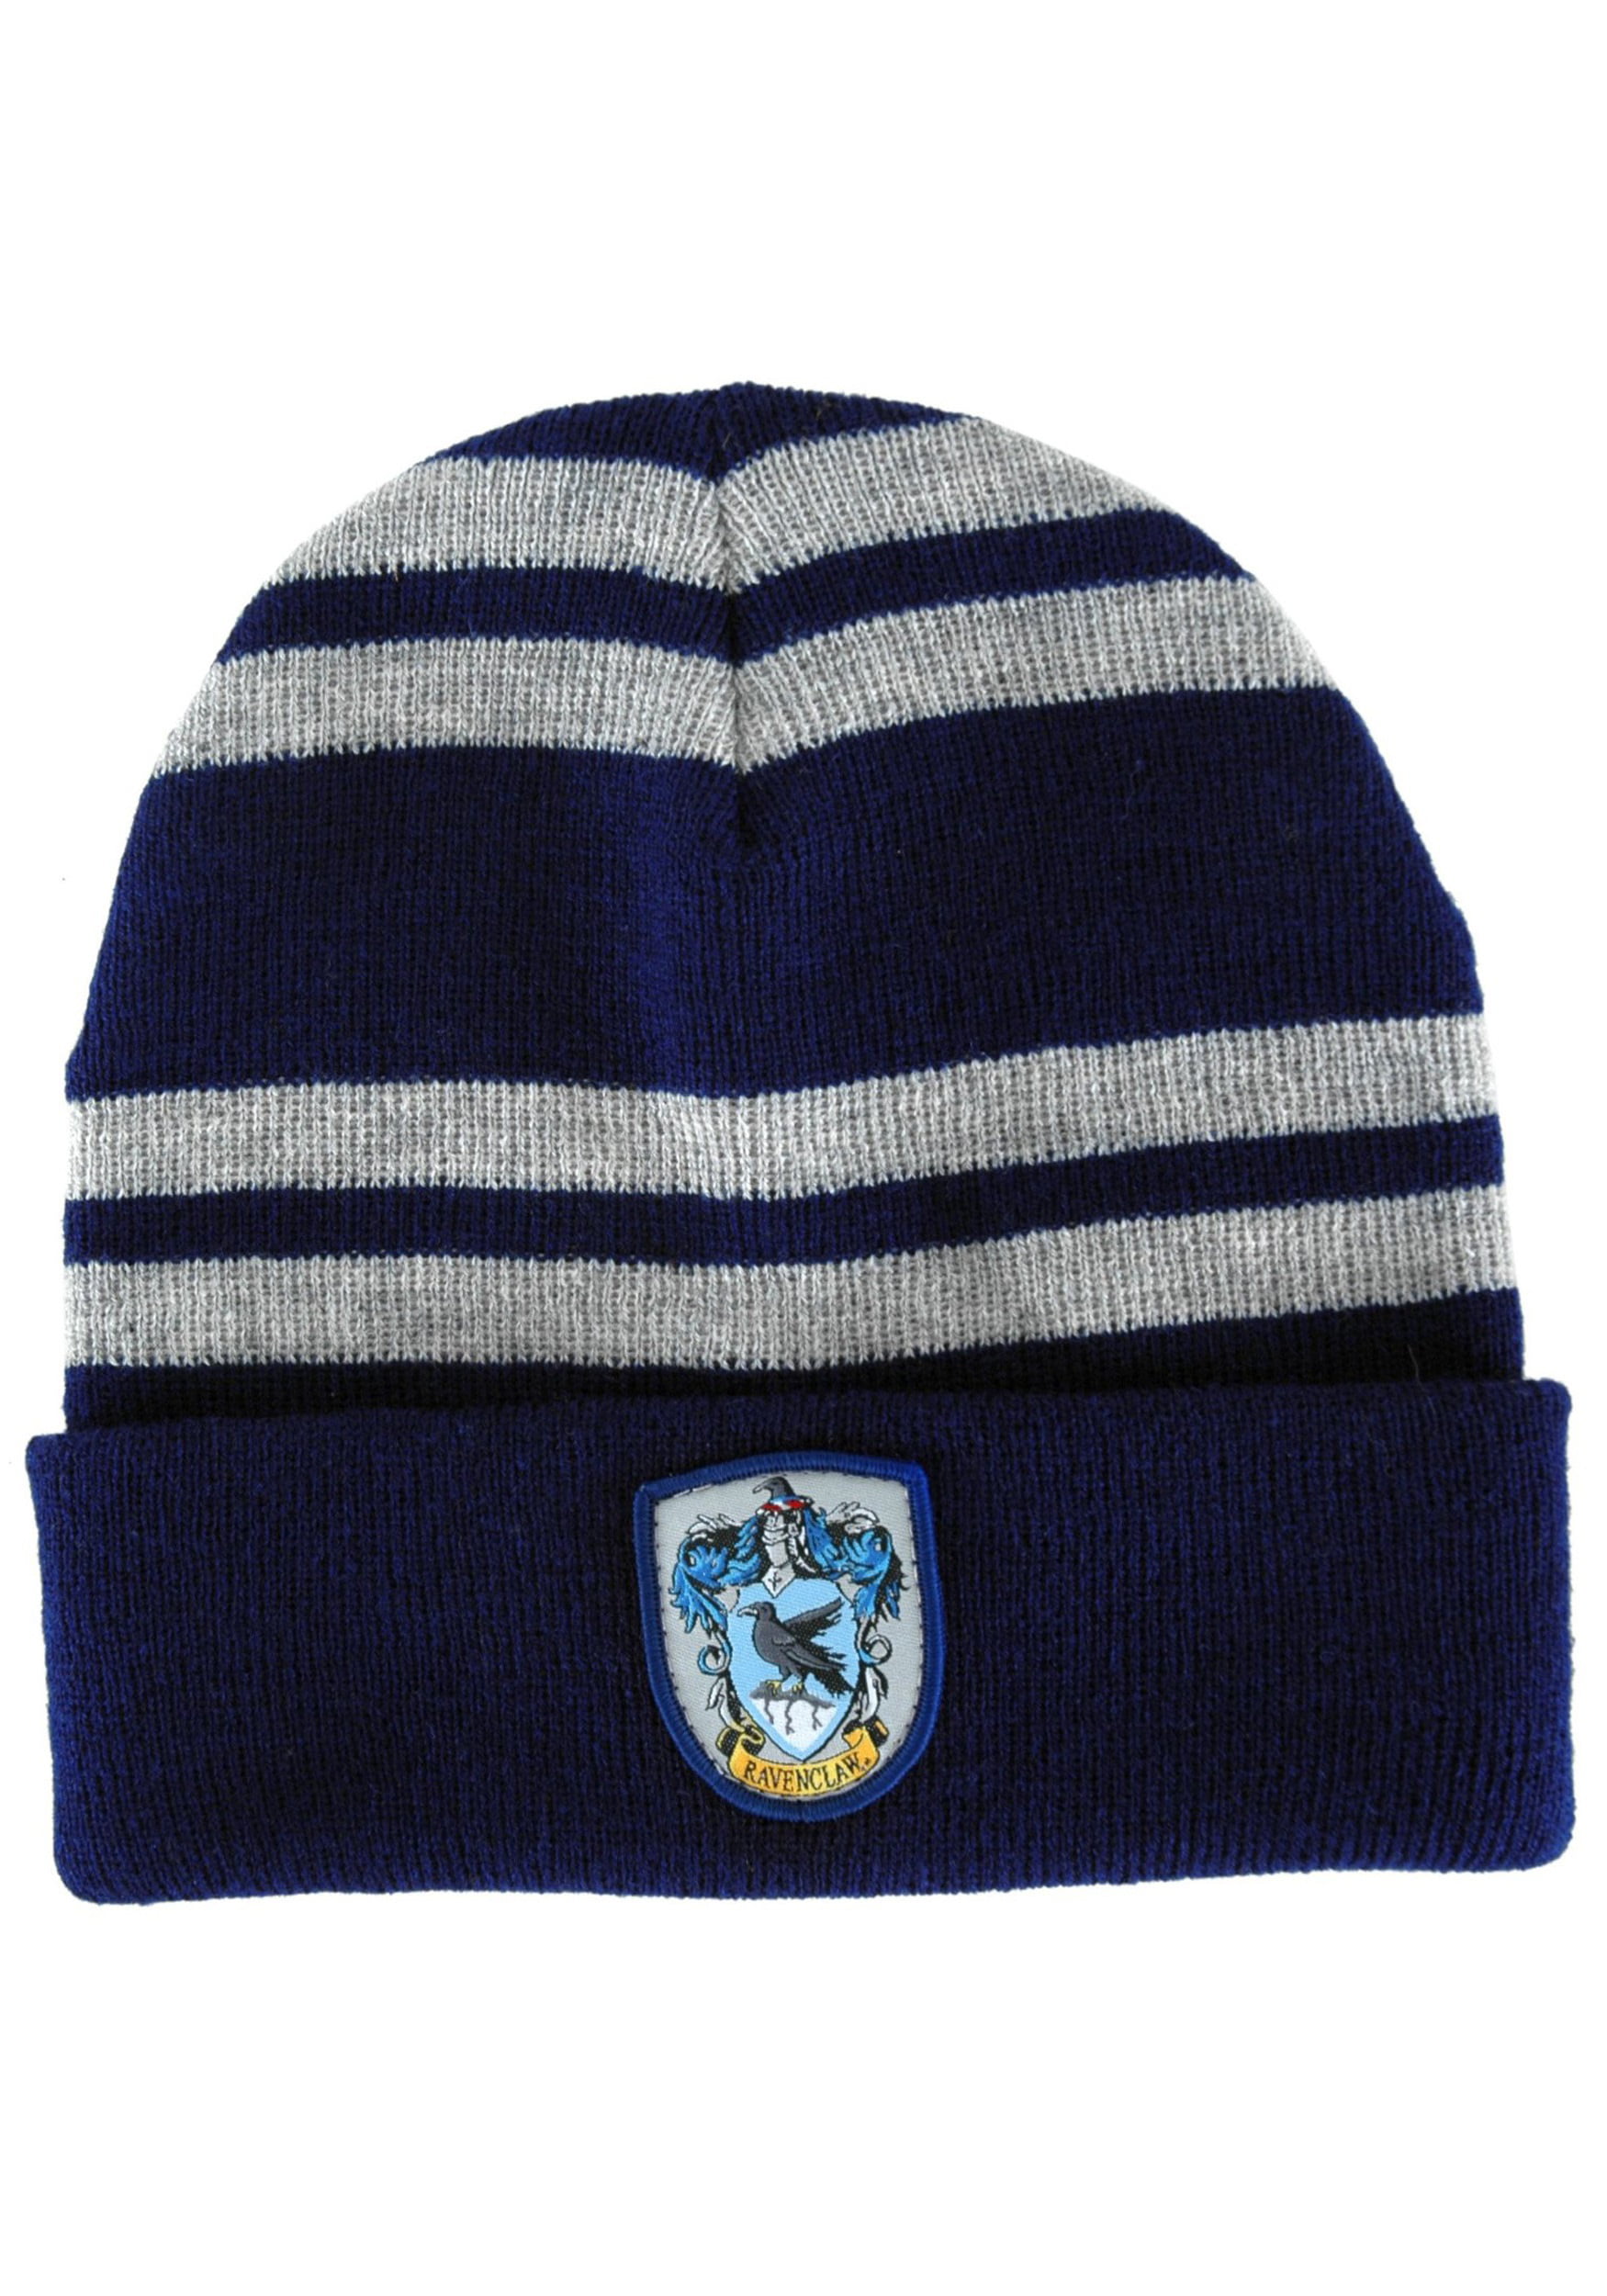 Adult Size Harry Potter Hogwarts Striped Knit Slouch Beanie